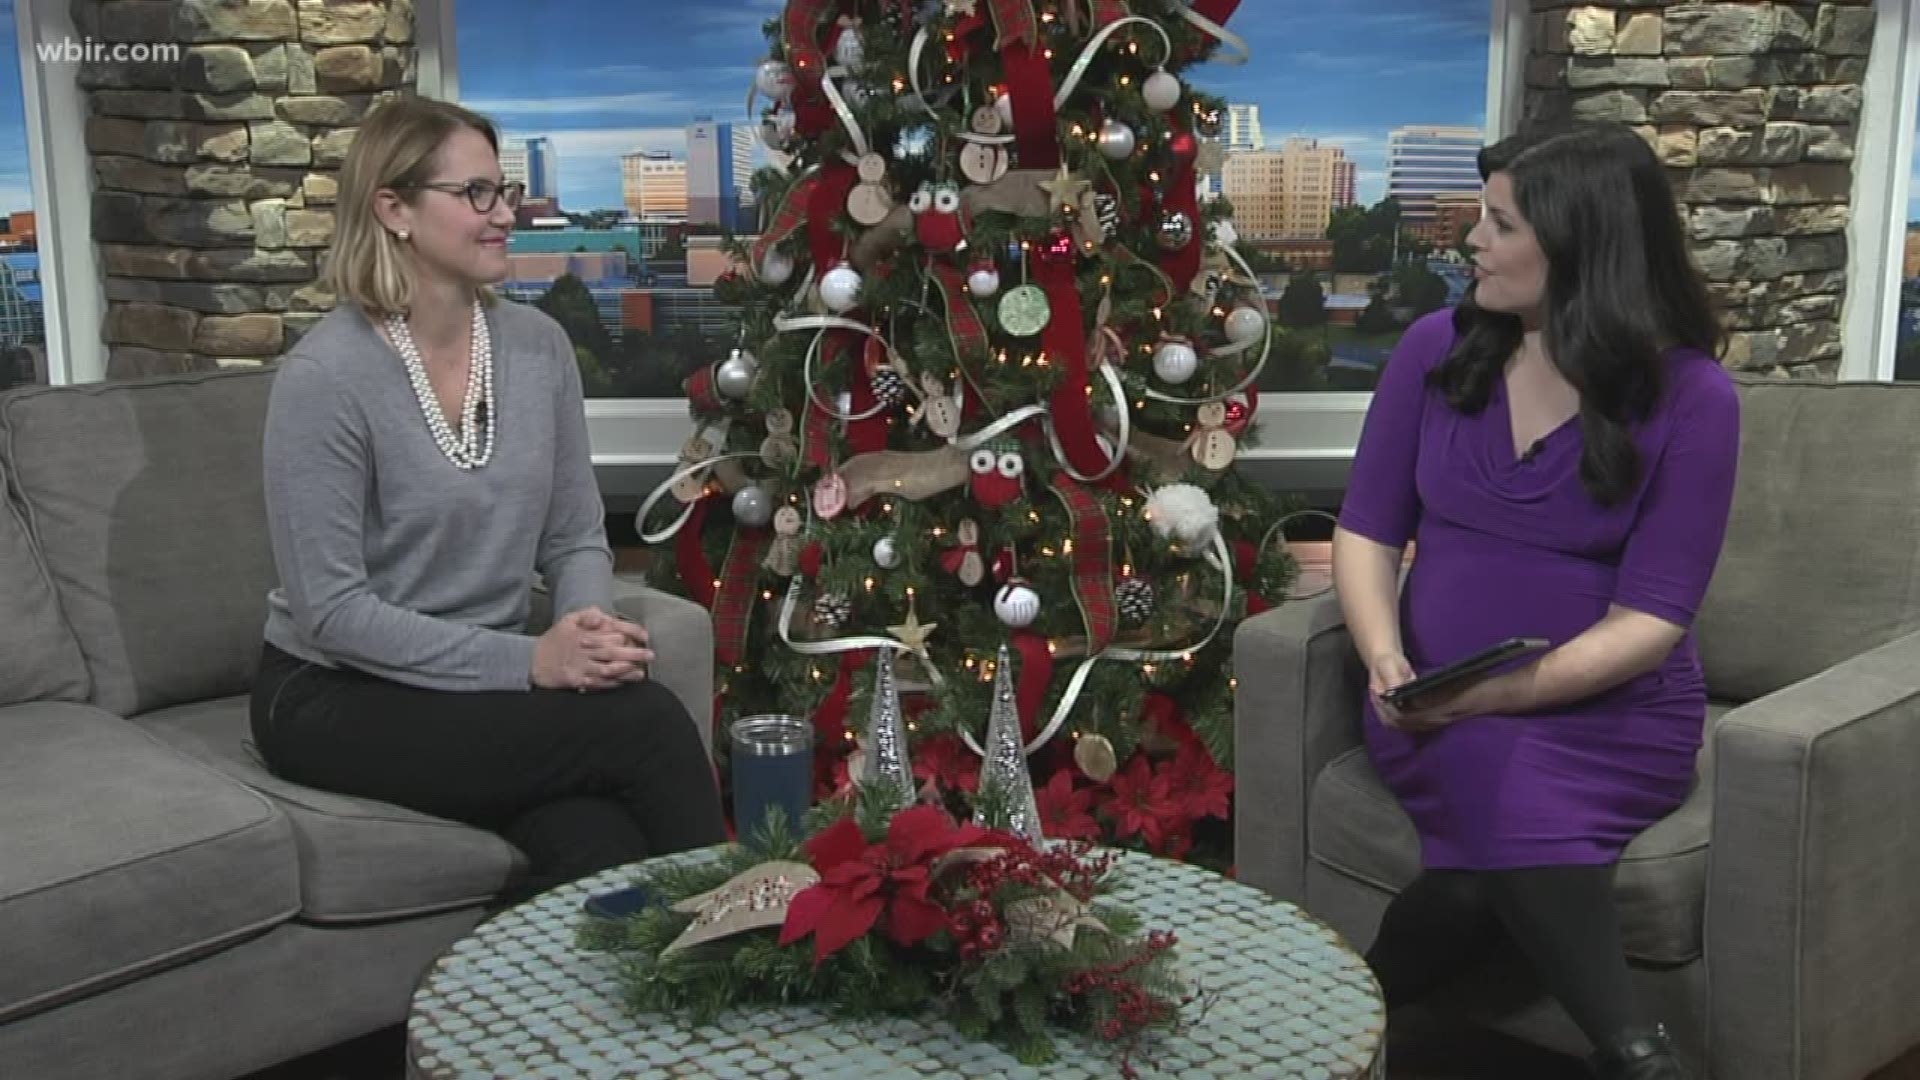 Dr. Paige Johnson explains how overeating can affect your mood and body during the holidays.